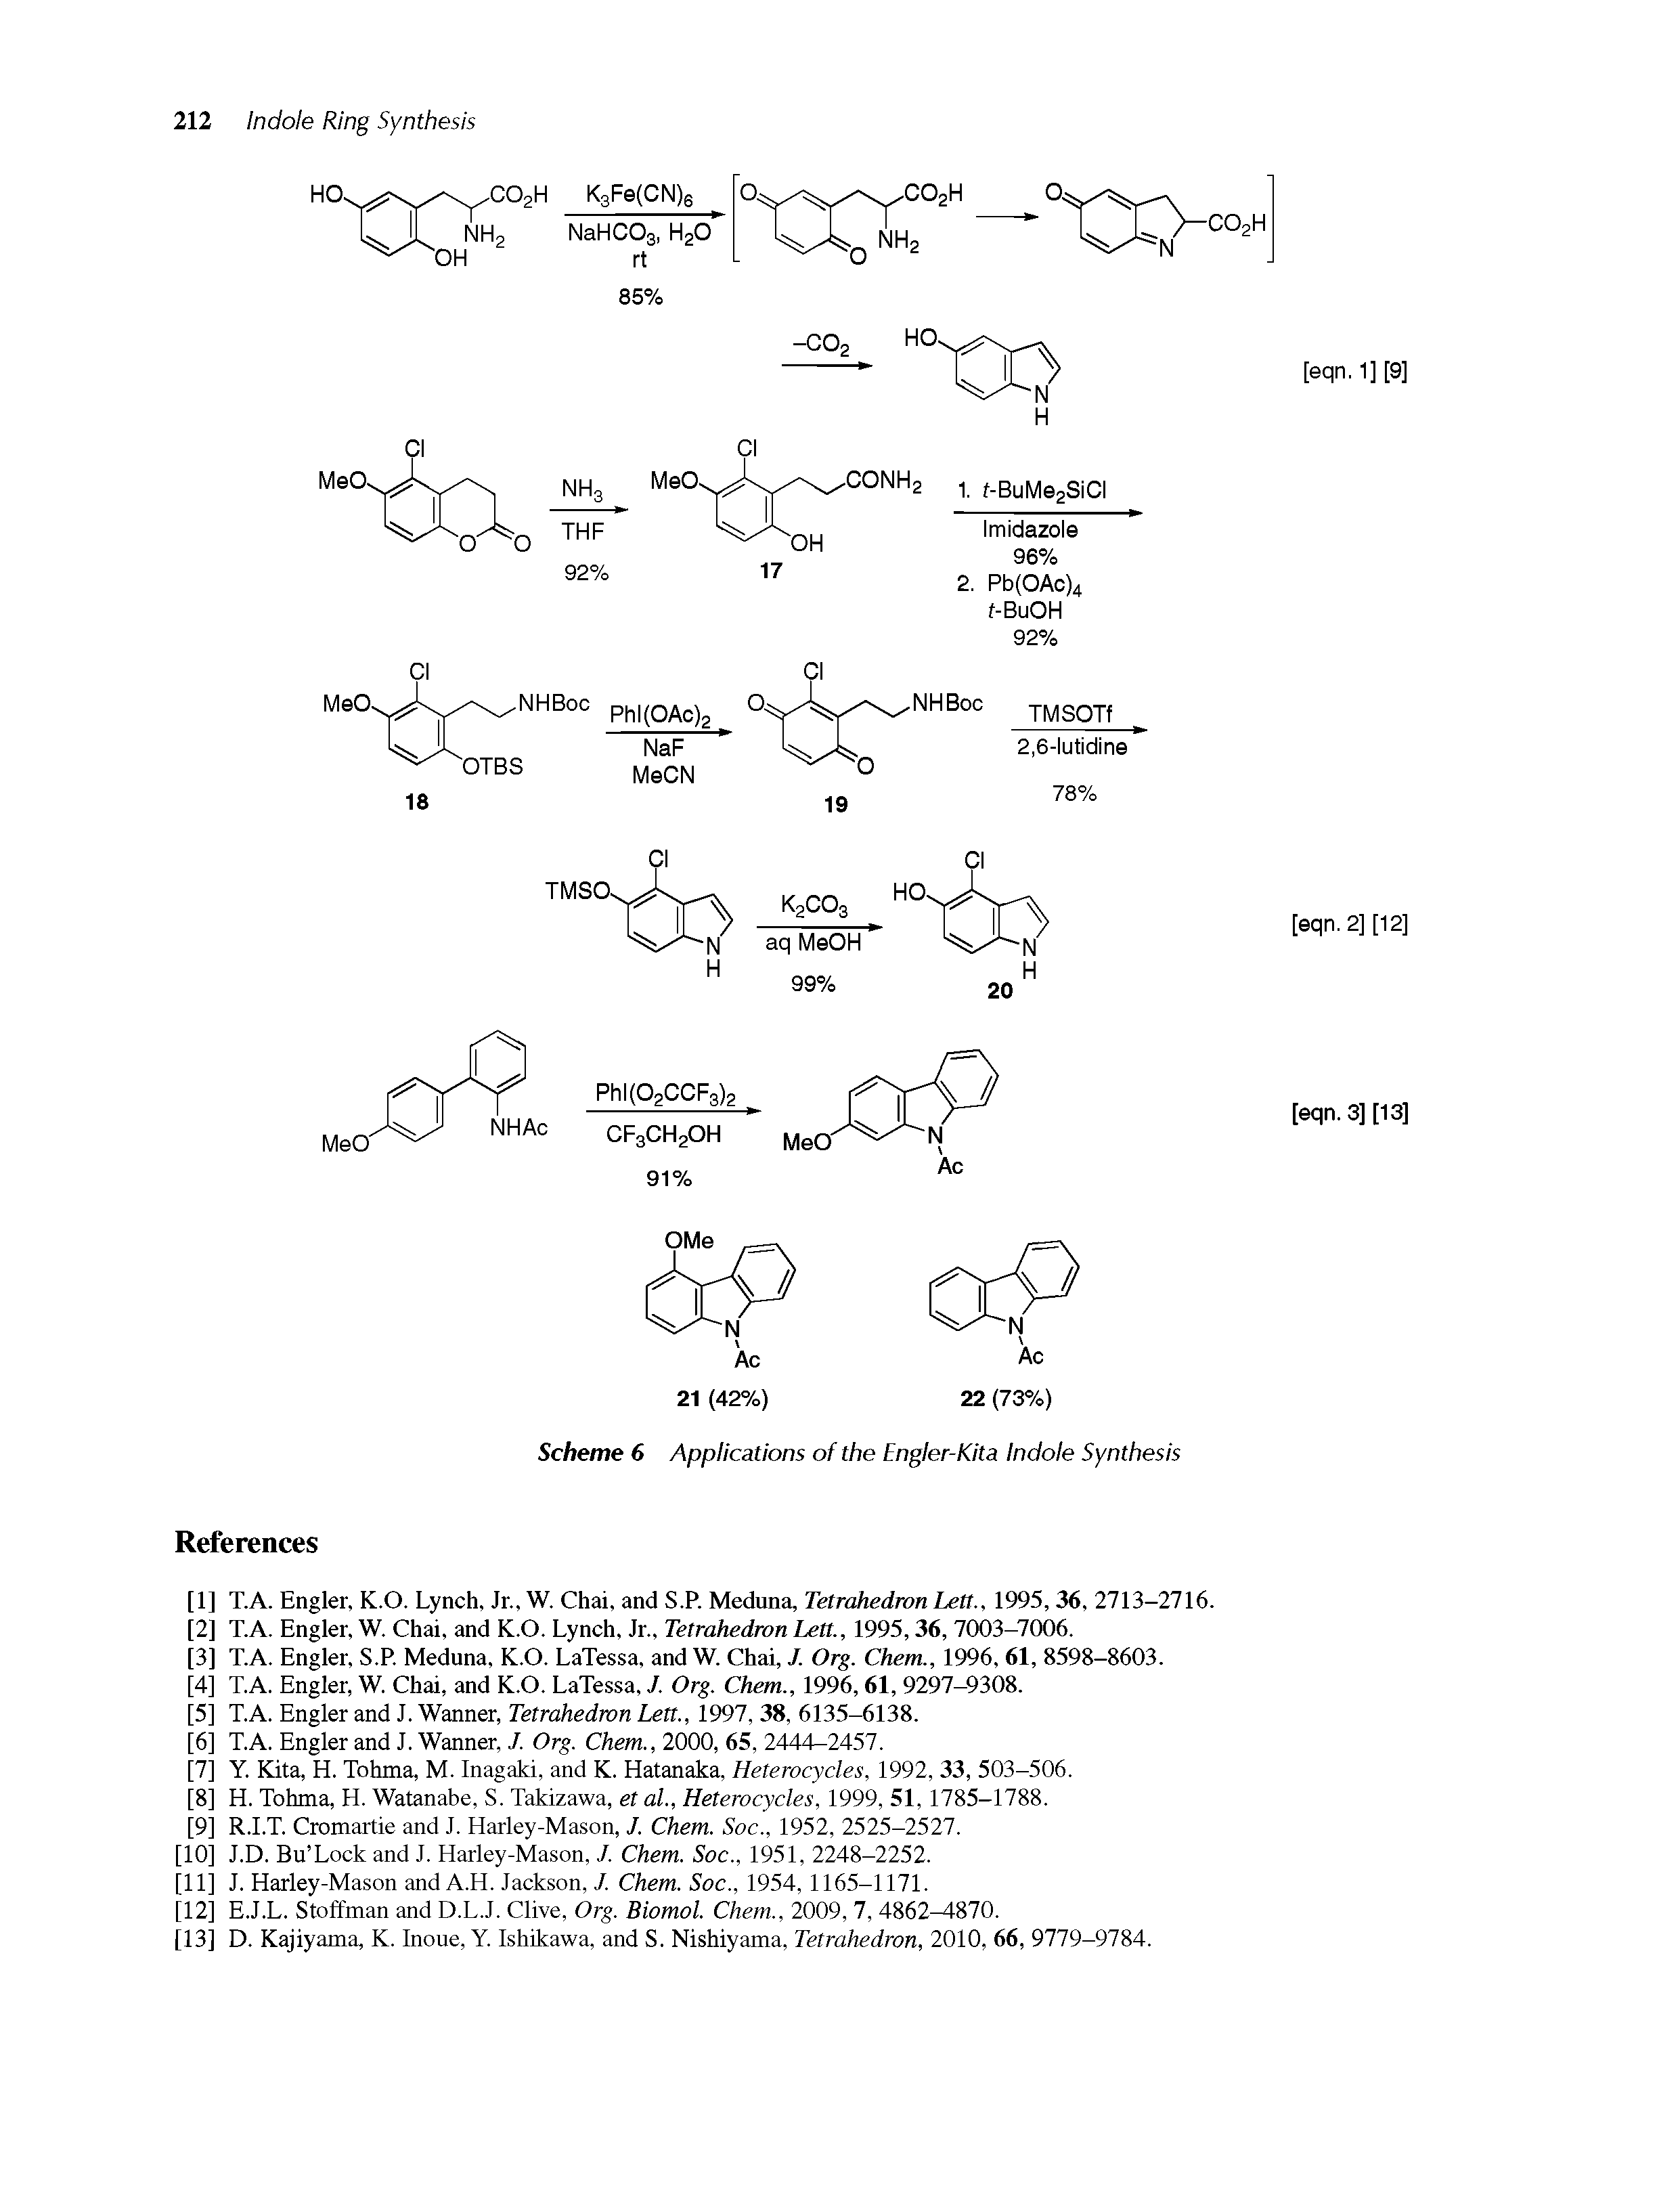 Scheme 6 Applications of the Engler-Kita Indole Synthesis...